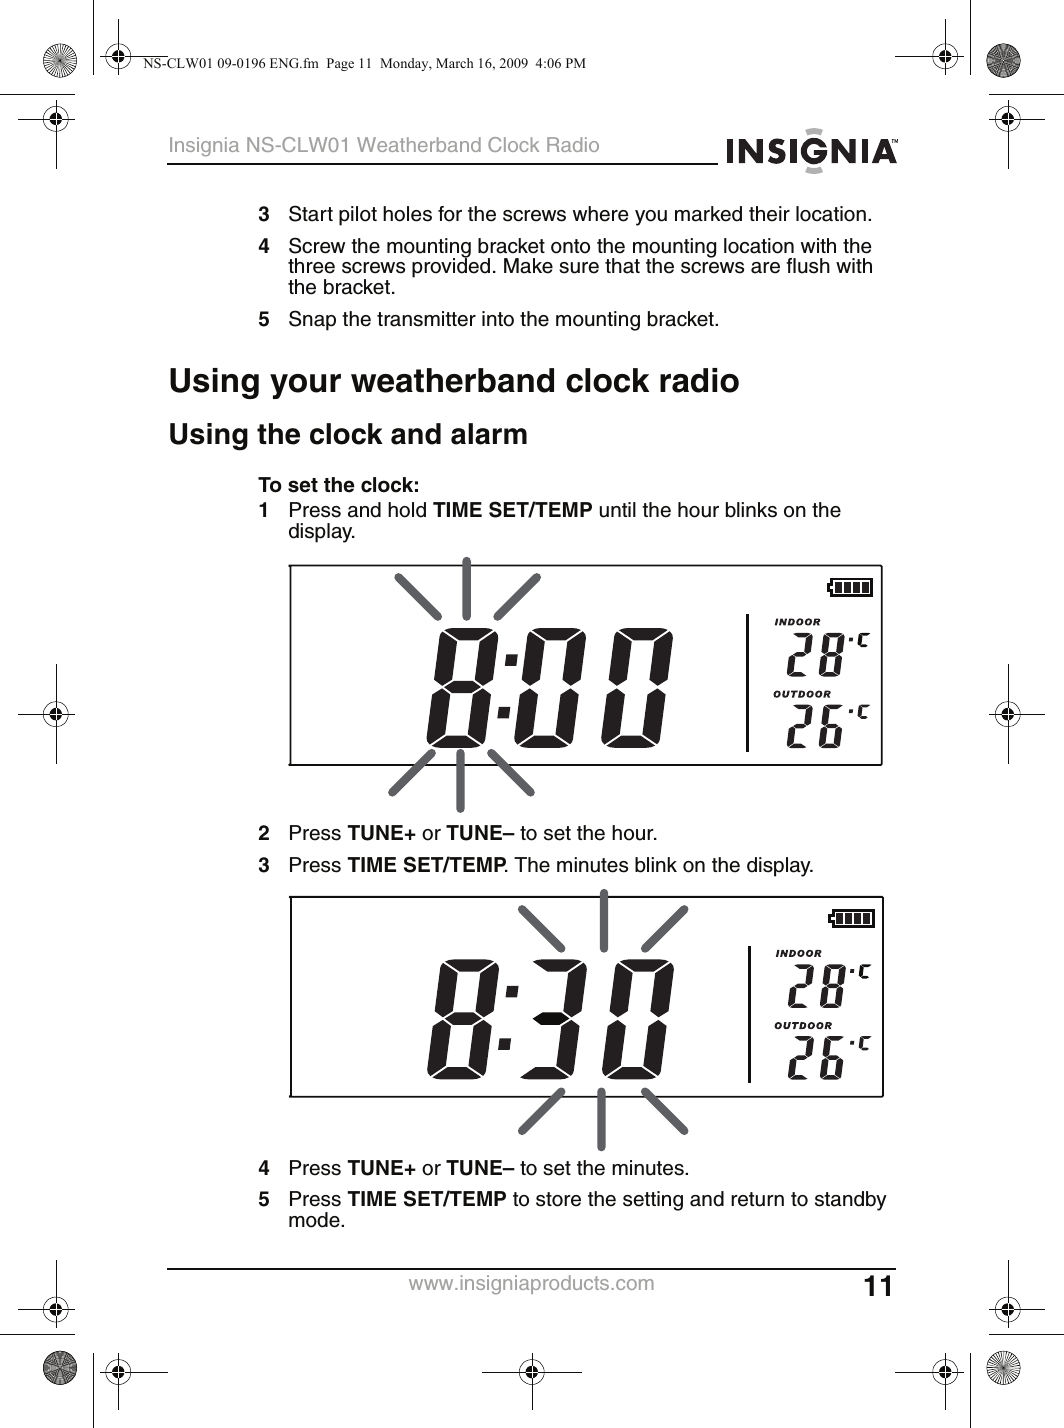 11Insignia NS-CLW01 Weatherband Clock Radiowww.insigniaproducts.com3Start pilot holes for the screws where you marked their location.4Screw the mounting bracket onto the mounting location with the three screws provided. Make sure that the screws are flush with the bracket.5Snap the transmitter into the mounting bracket.Using your weatherband clock radioUsing the clock and alarmTo set the clock:1Press and hold TIME SET/TEMP until the hour blinks on the display.2Press TUNE+ or TUNE– to set the hour.3Press TIME SET/TEMP. The minutes blink on the display.4Press TUNE+ or TUNE– to set the minutes.5Press TIME SET/TEMP to store the setting and return to standby mode.NS-CLW01 09-0196 ENG.fm  Page 11  Monday, March 16, 2009  4:06 PM